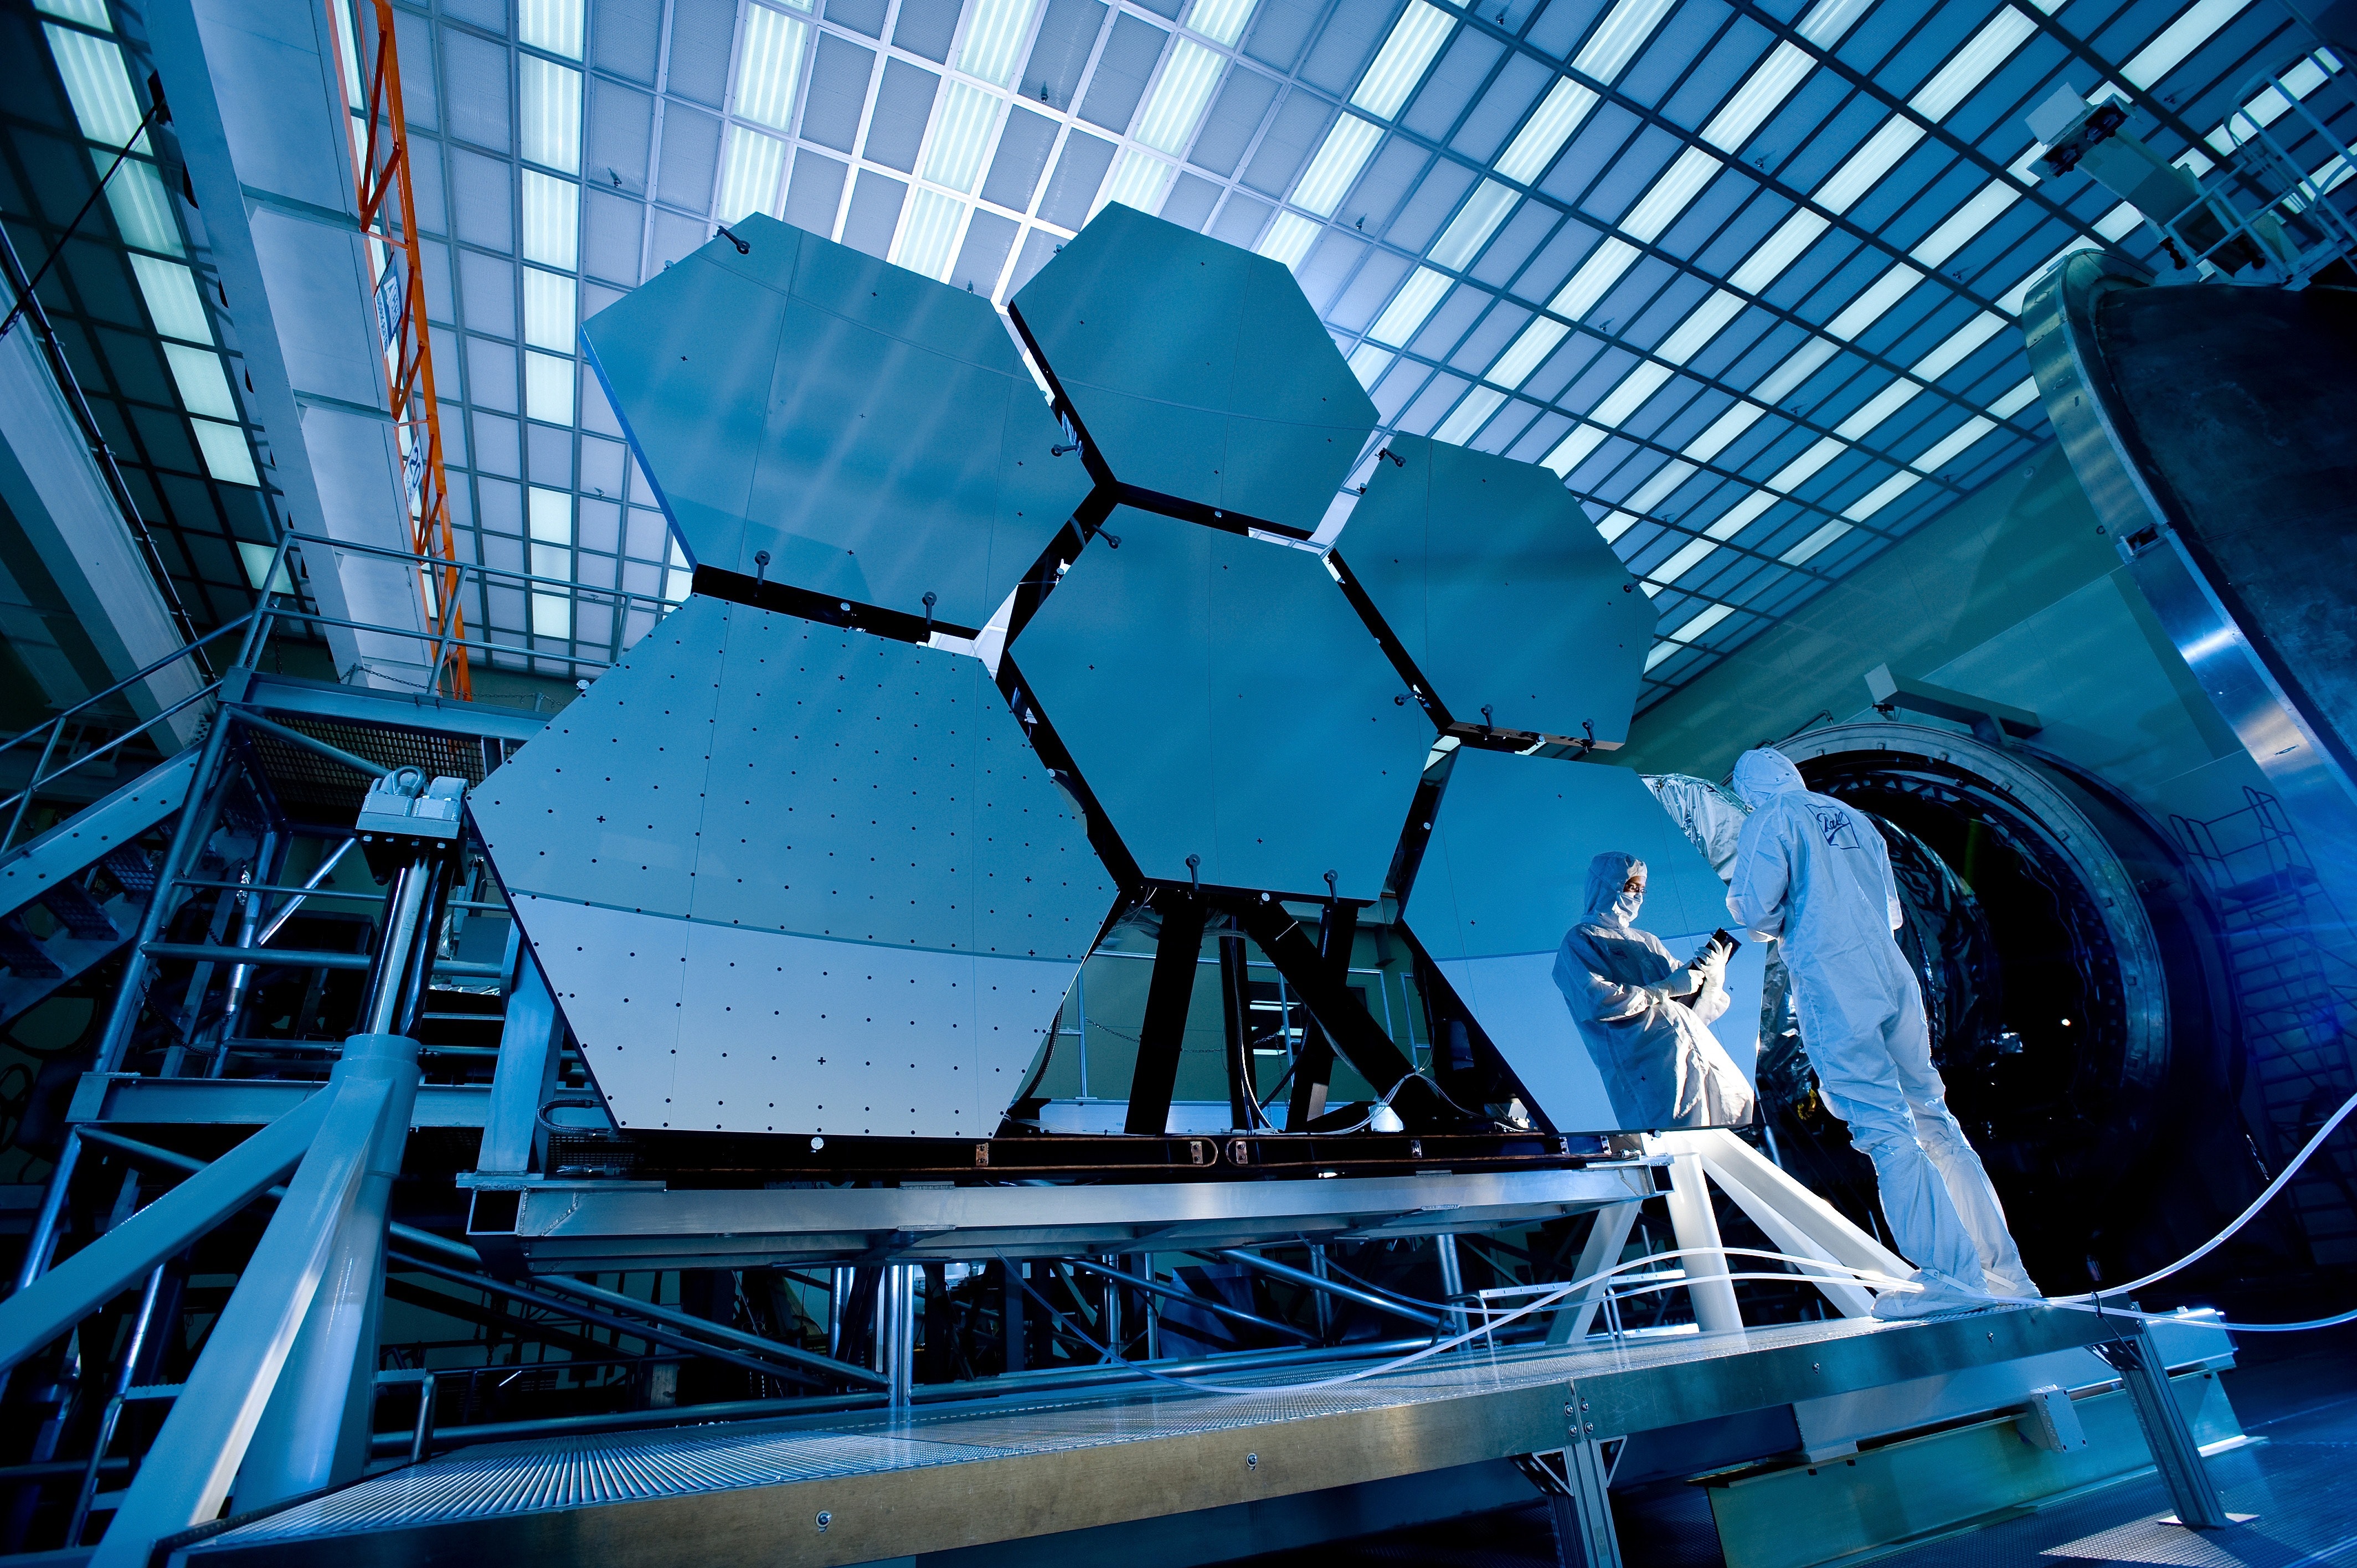 two people in white protective suits examine hexagonal solar panel array inside a closed warehouse environment